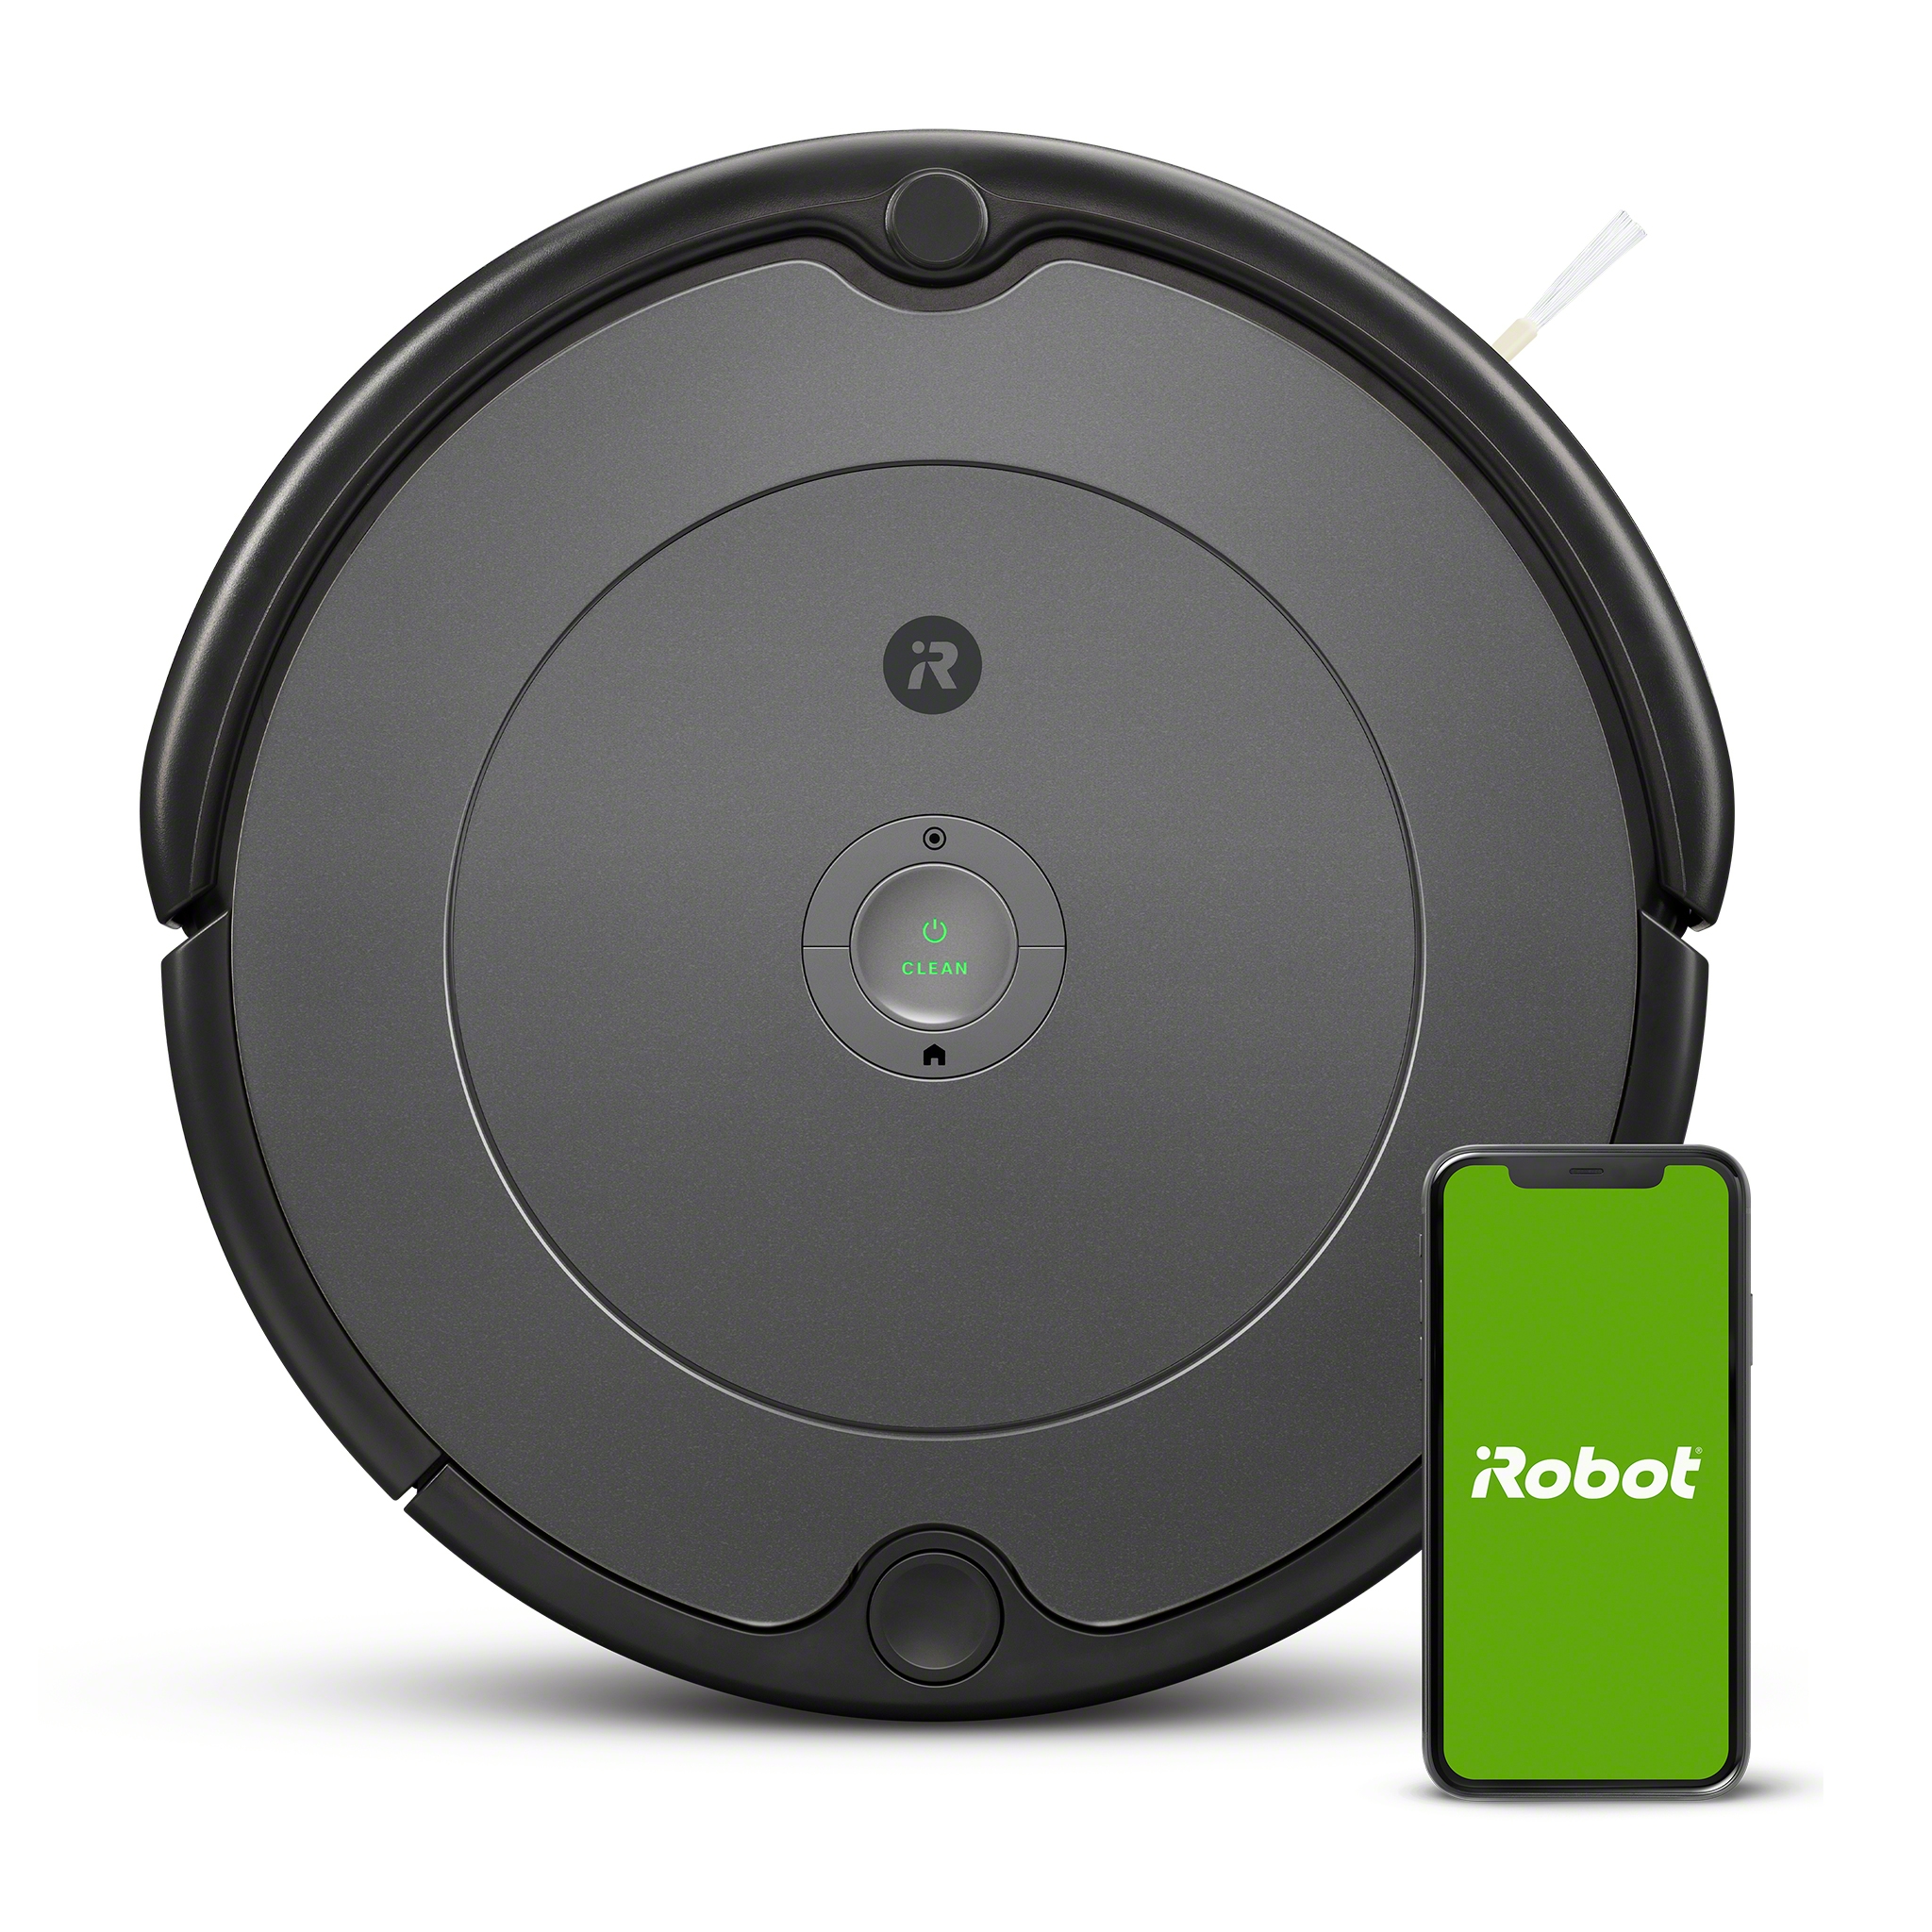 iRobot® Roomba® 676 Robot Vacuum-Wi-Fi Connectivity, Personalized Cleaning Recommendations, Works with Google, Good for Pet Hair, Carpets, Hard Floors, Self-Charging - image 1 of 16